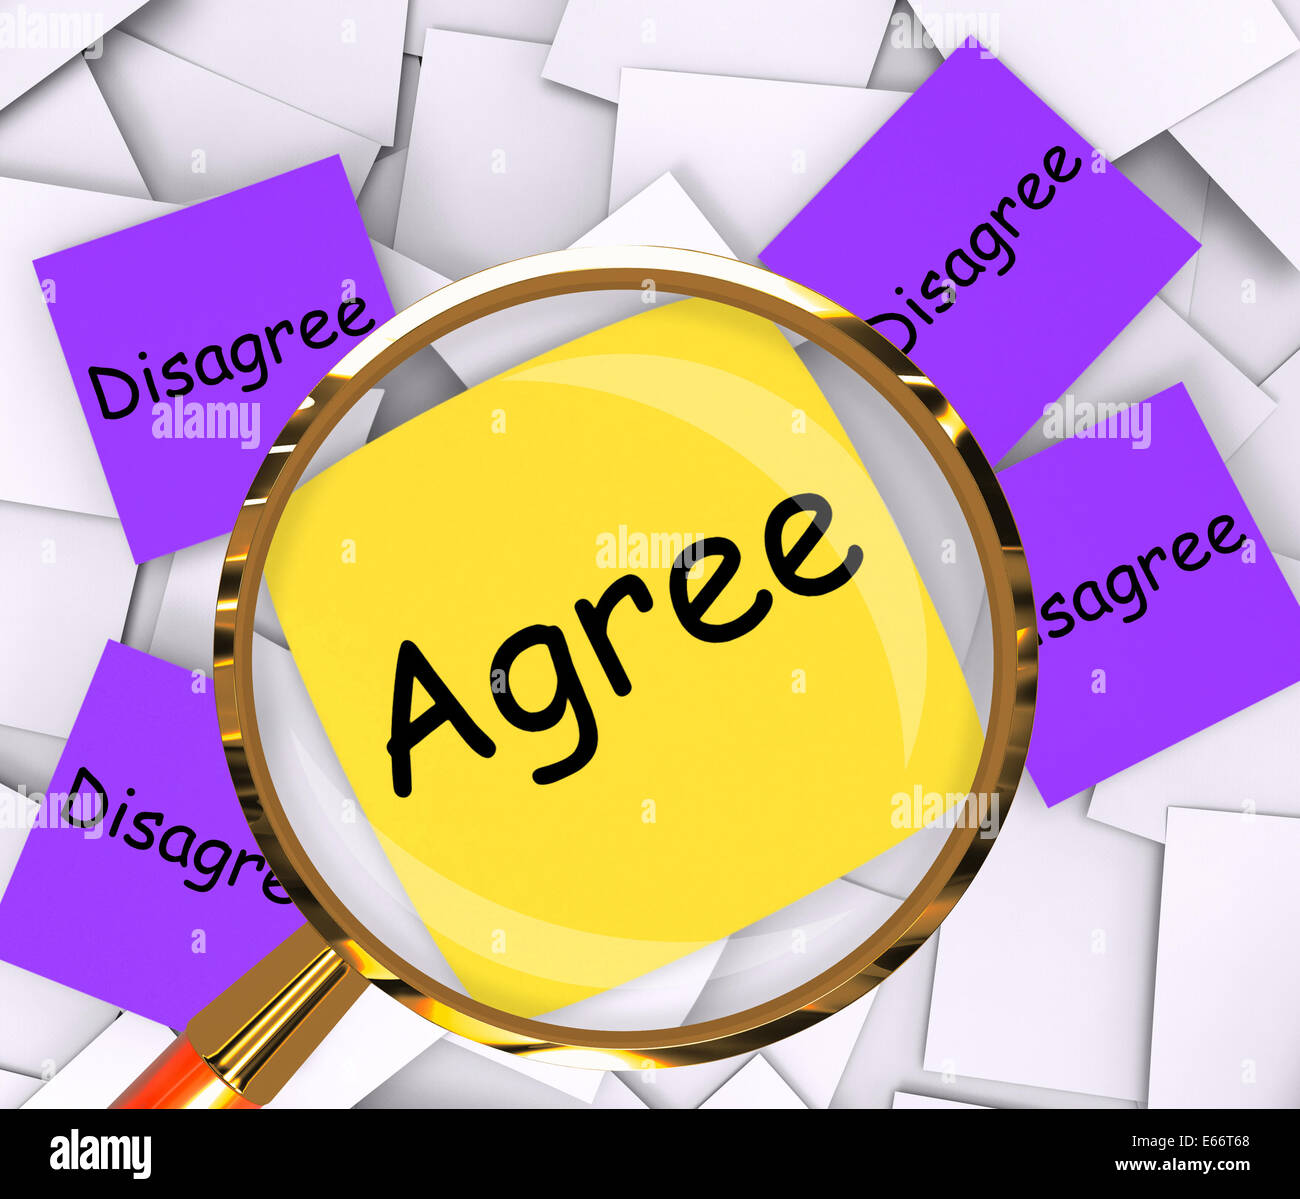 Agree Disagree Post-It Papers Meaning Opinion Agreement Or Disagreement Stock Photo